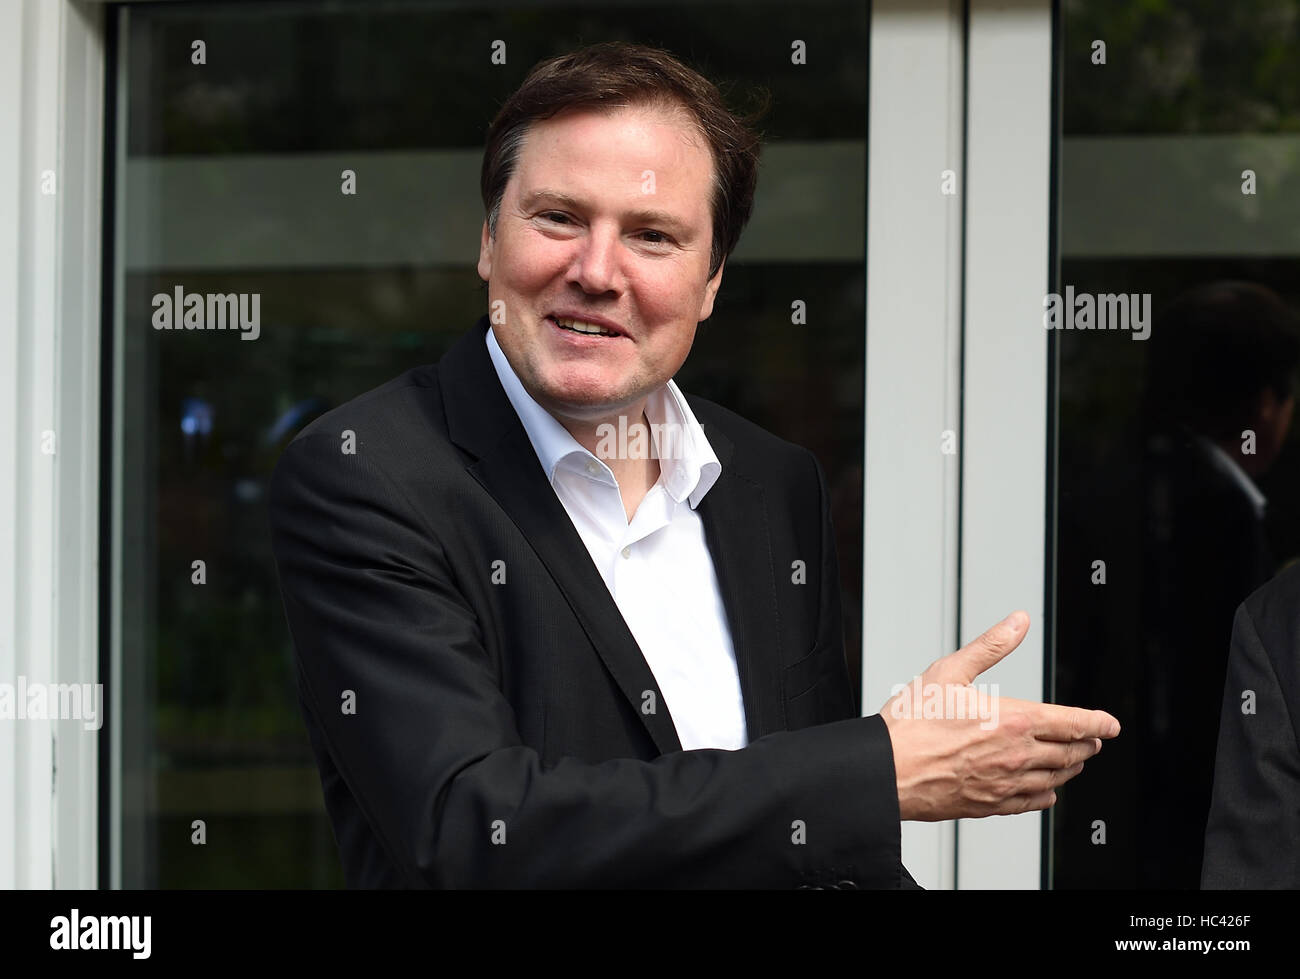 Holzminden, Germany. 16th July, 2014. ARCHIVE - Heinz-Juergen Bertram, head of the board of the Symrise AG, photographed in Holzminden, Germany, 16 July 2014. The member of the supervisory board of the aroma and scent producers Symrise has prolonged their contract with their head of the board Heinz-Juergen Bertram. Photo: Swen Pförtner/dpa/Alamy Live News Stock Photo